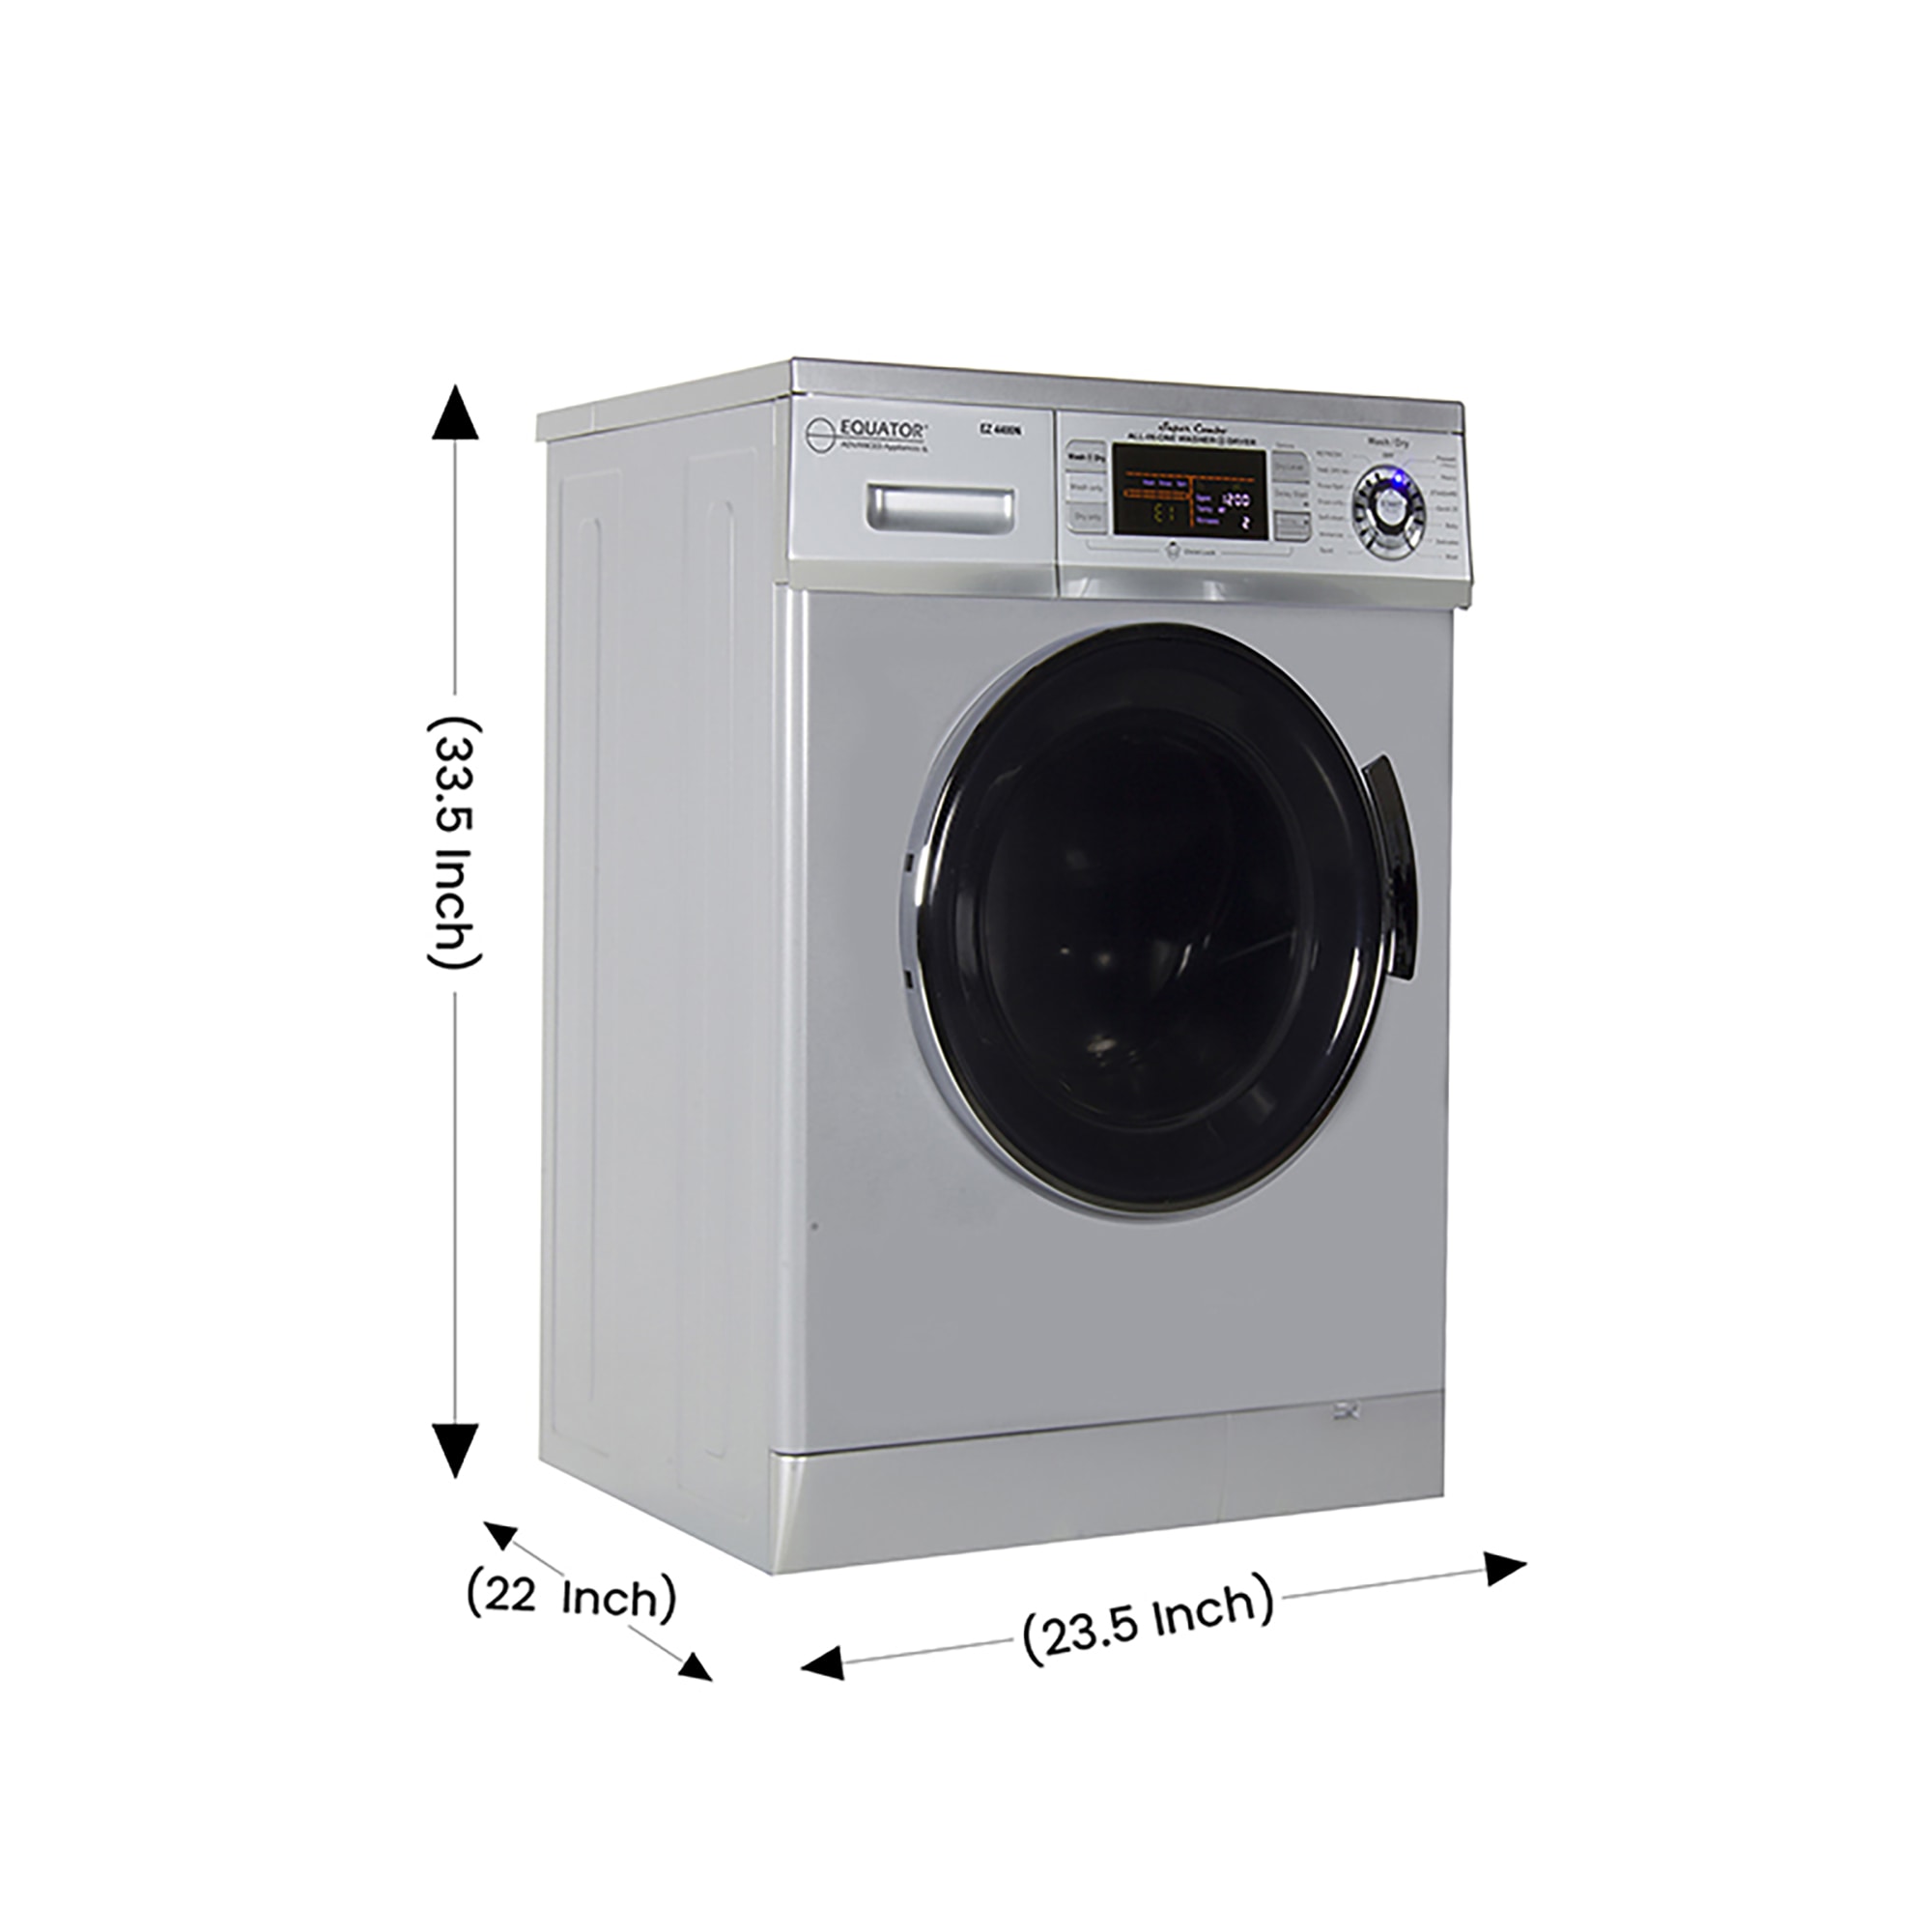 Sleek Silver Washing Machine With Detergent Bottle And Clothing